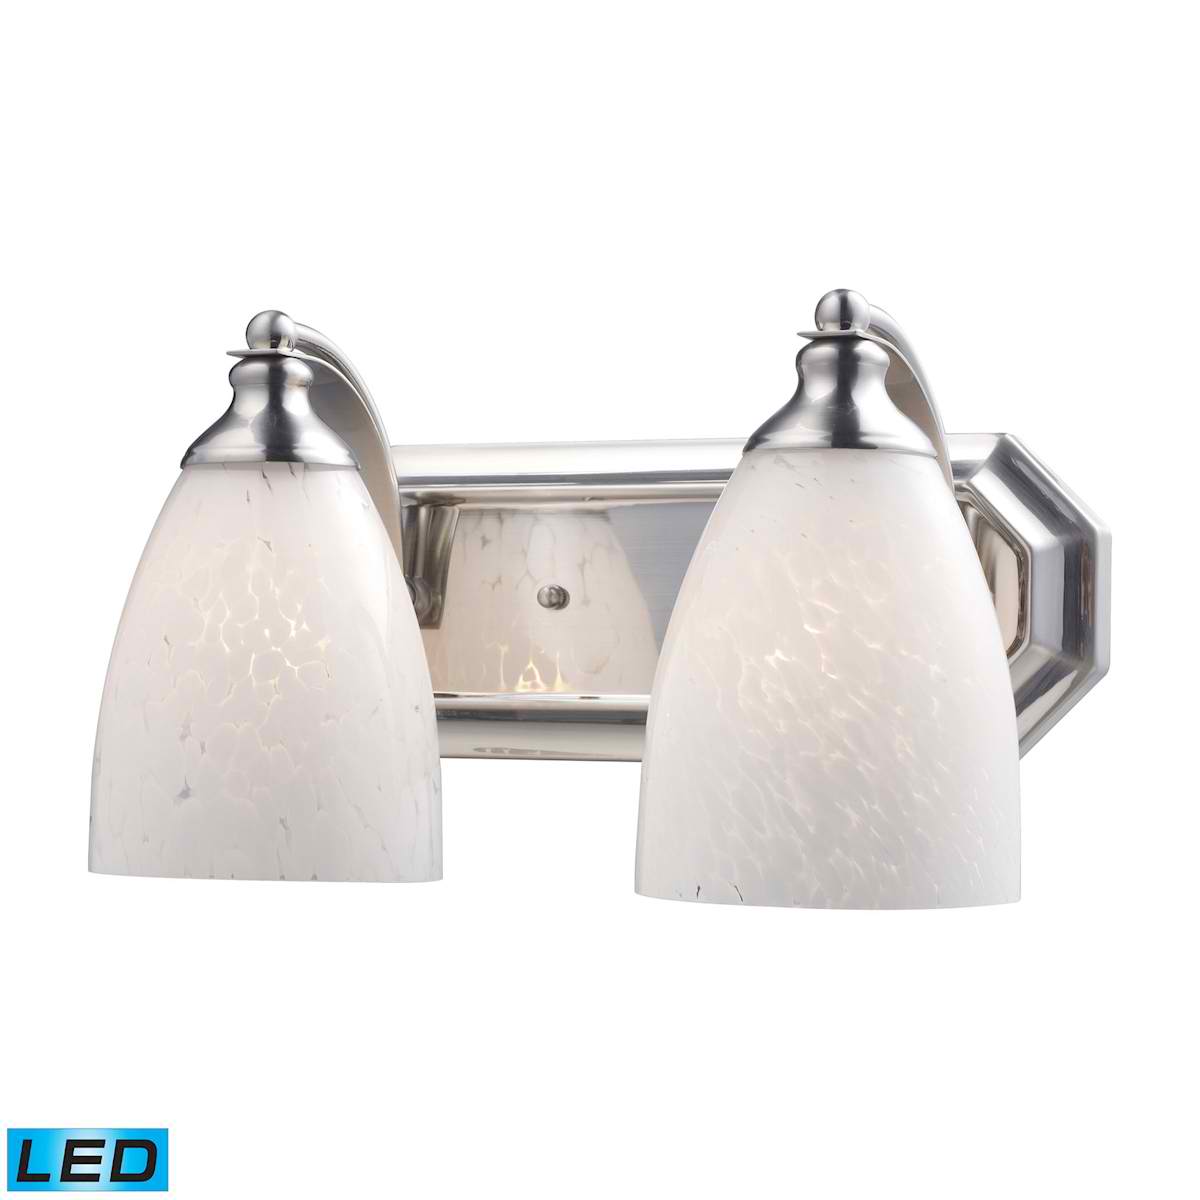 2 Light Vanity in Satin Nickel and Snow White Glass - LED, 800 Lumens (1600 Lumens Total) with Full Scale